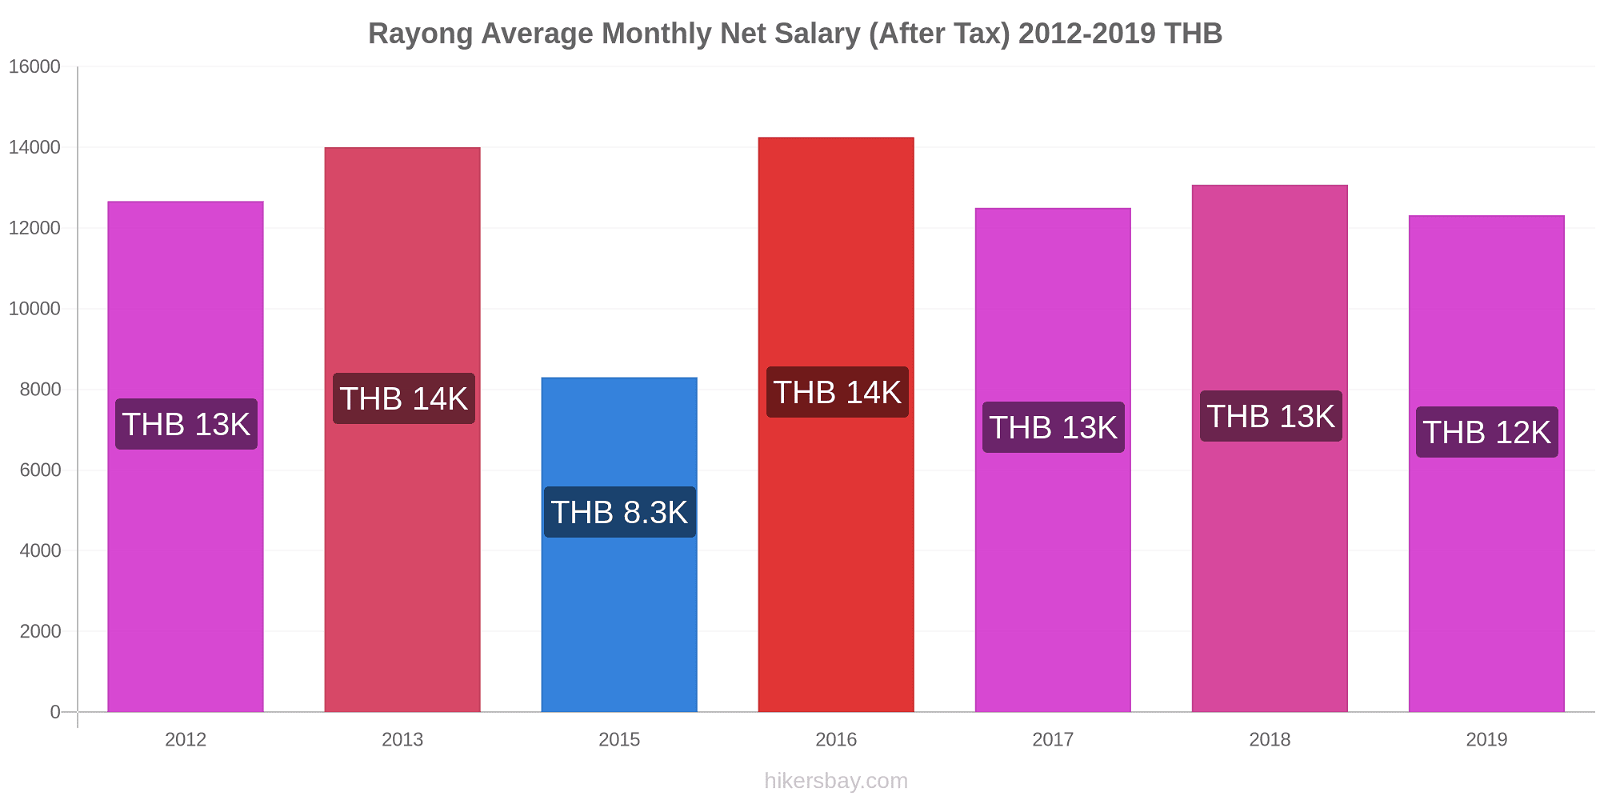 Rayong price changes Average Monthly Net Salary (After Tax) hikersbay.com